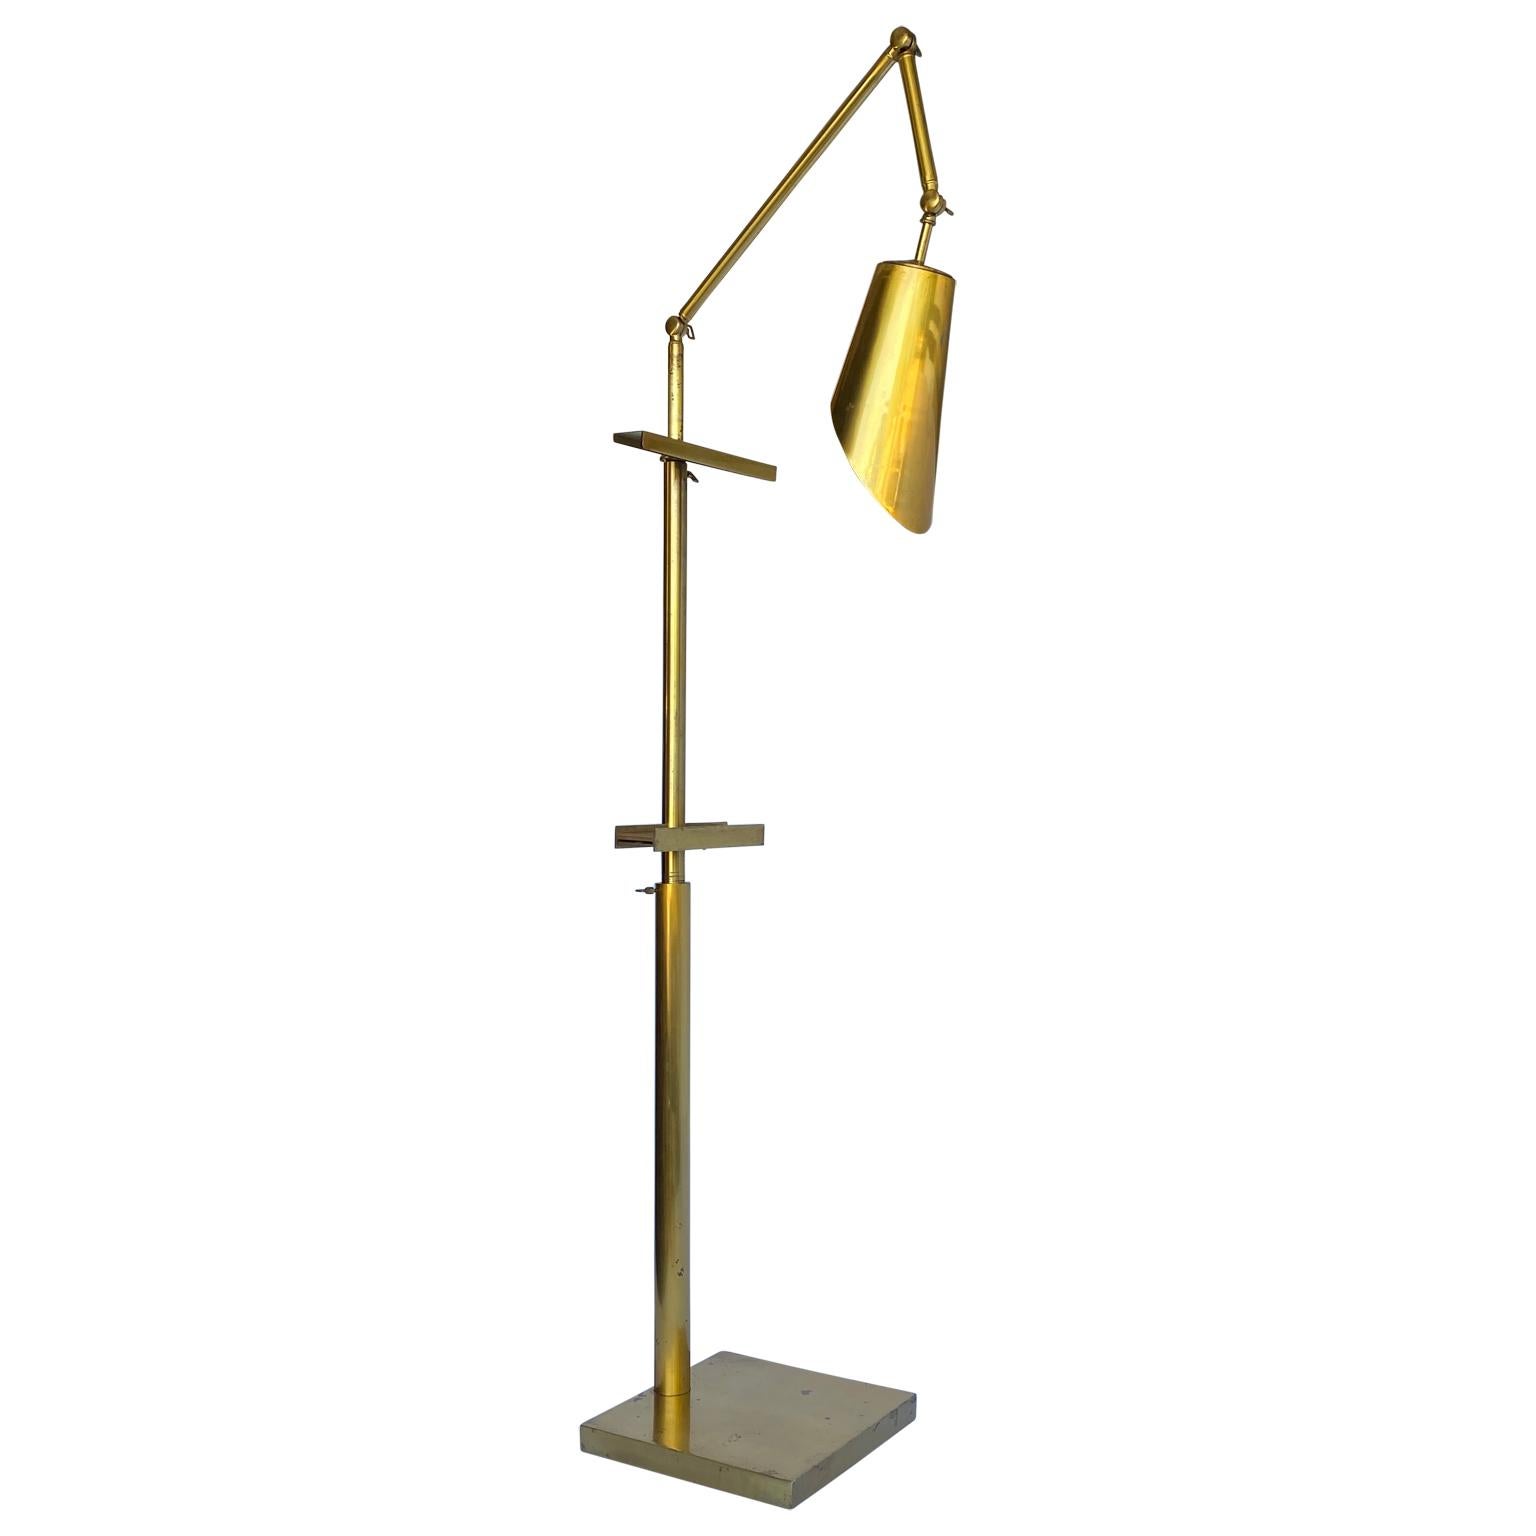 Large brass easel floor lamp in the style of Angelo Lelii, circa 1960's, Italy.
Easel has a rosewood panel for the painting to stand on.

The easel lamp is newly rewired to US standard and in good sturdy condition.